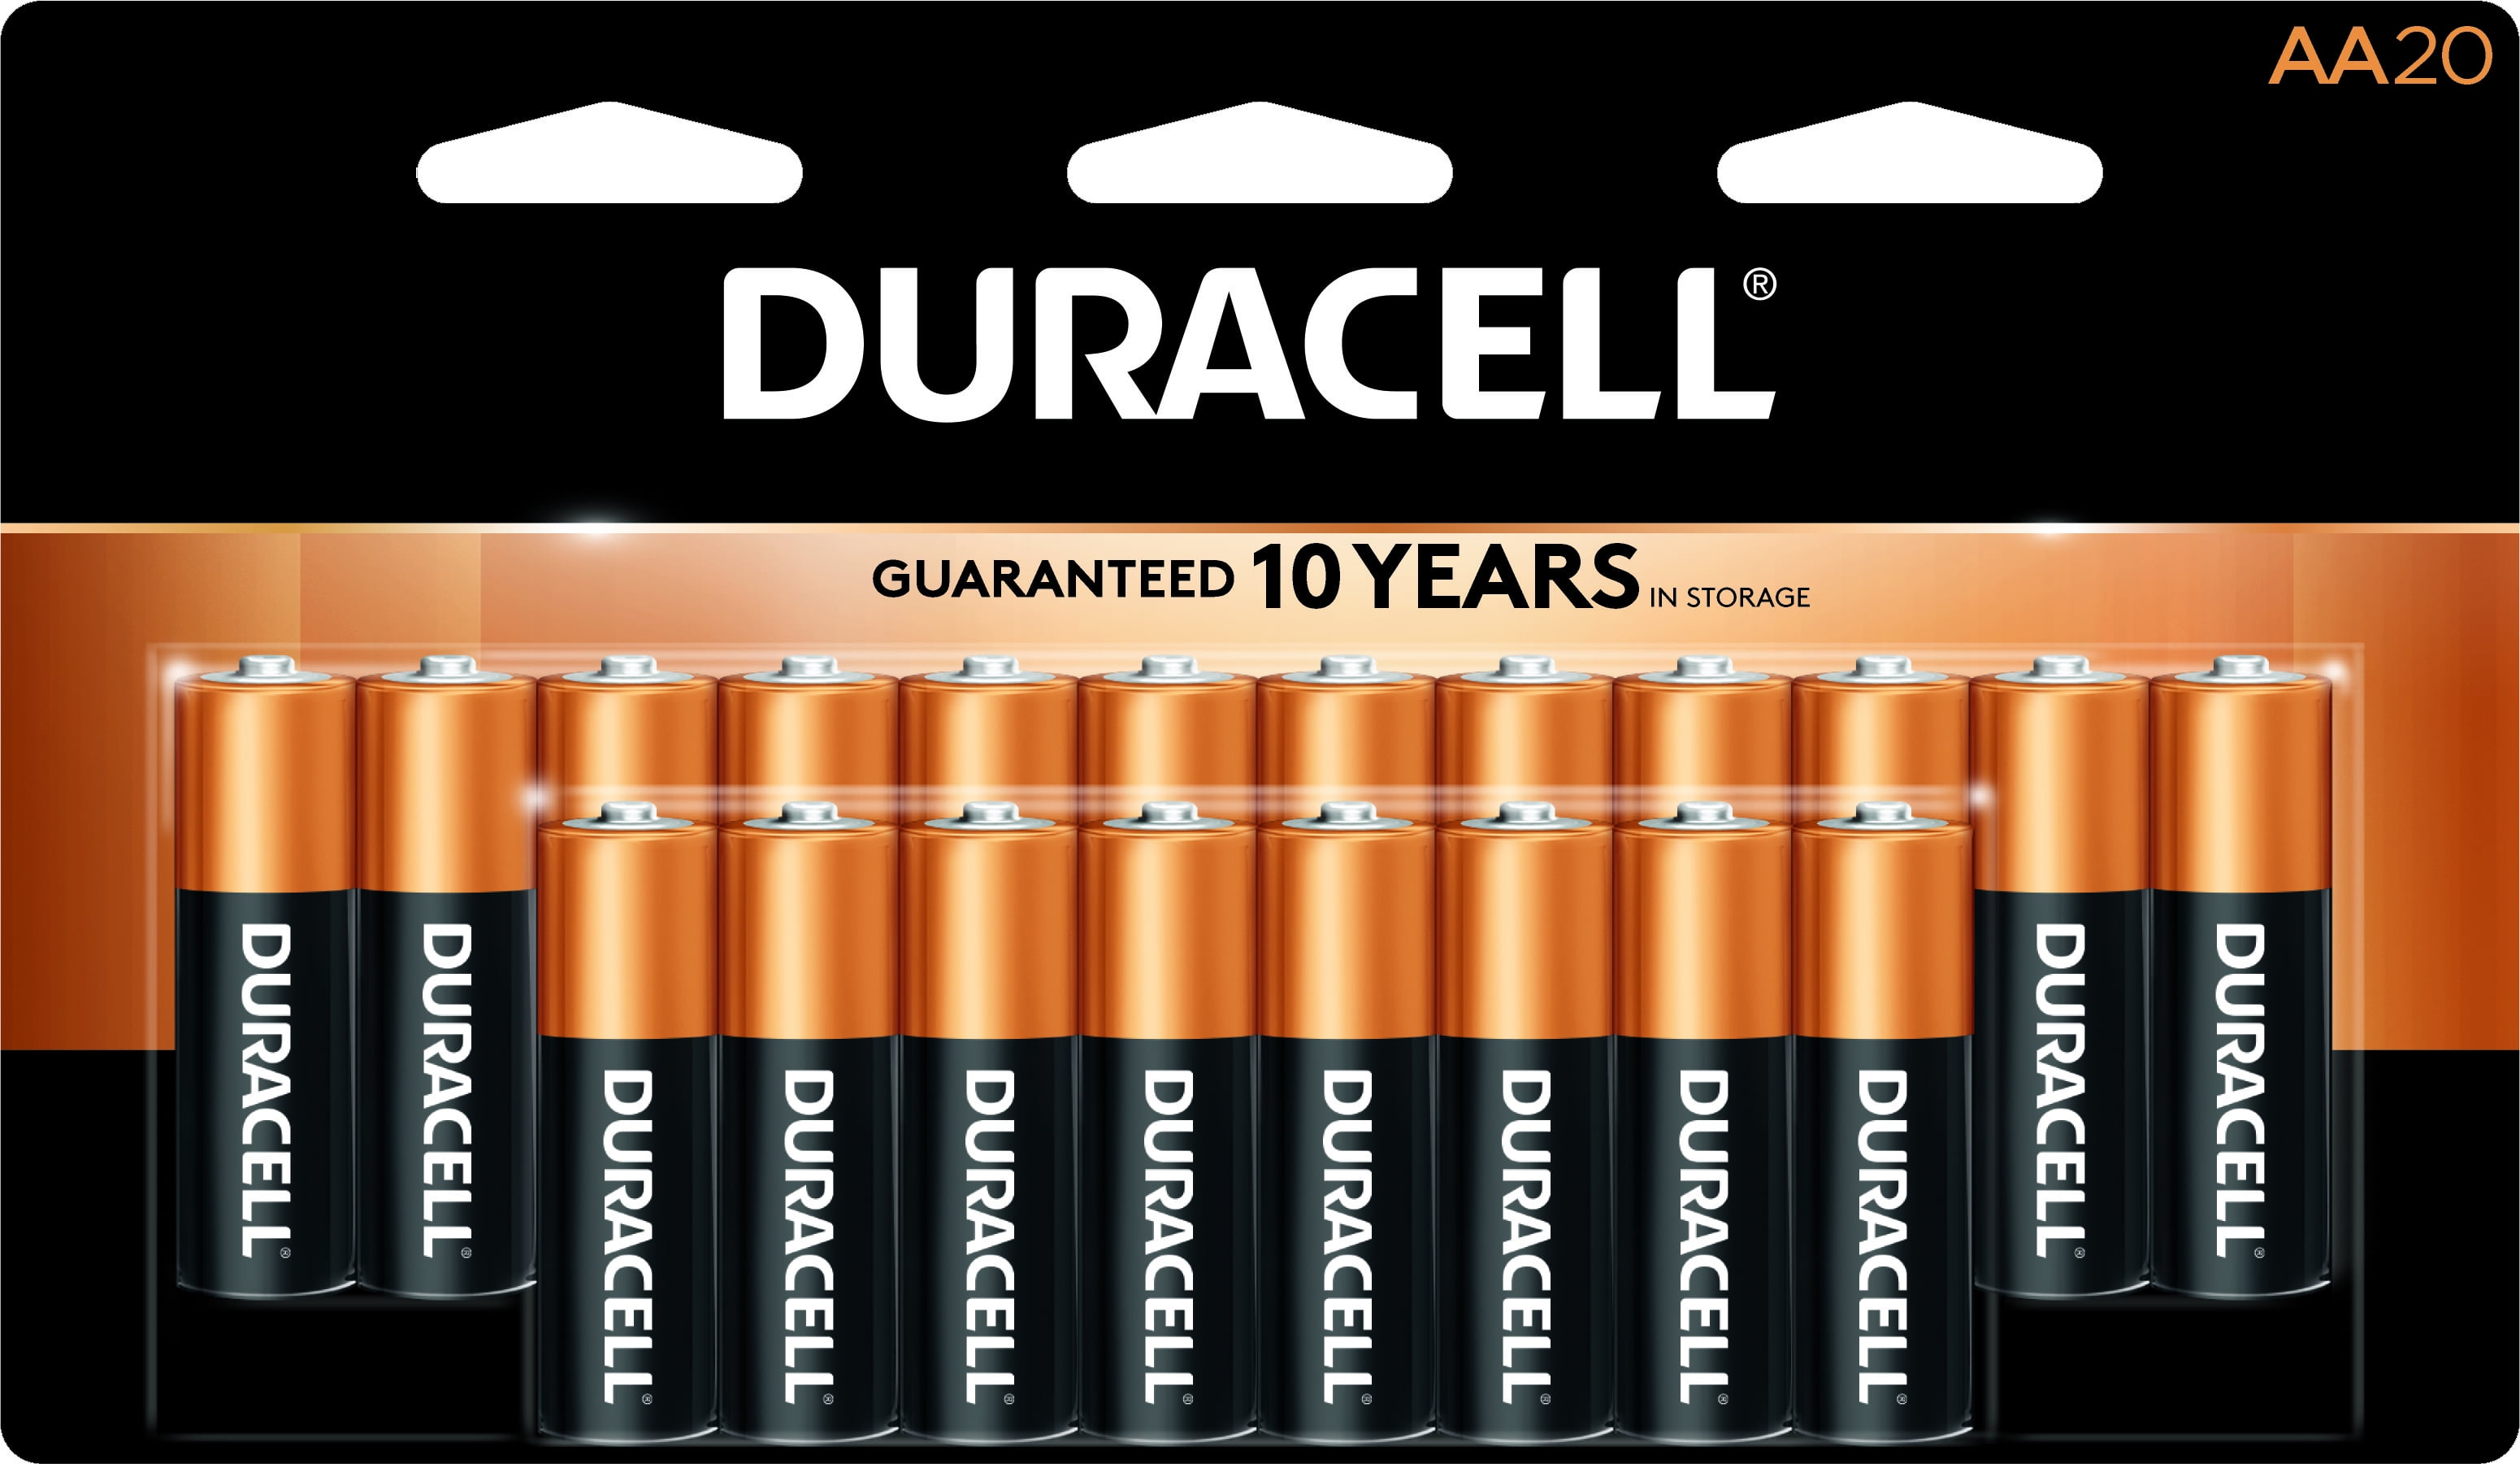 Duracell CopperTop AA Batteries, 48 ct.